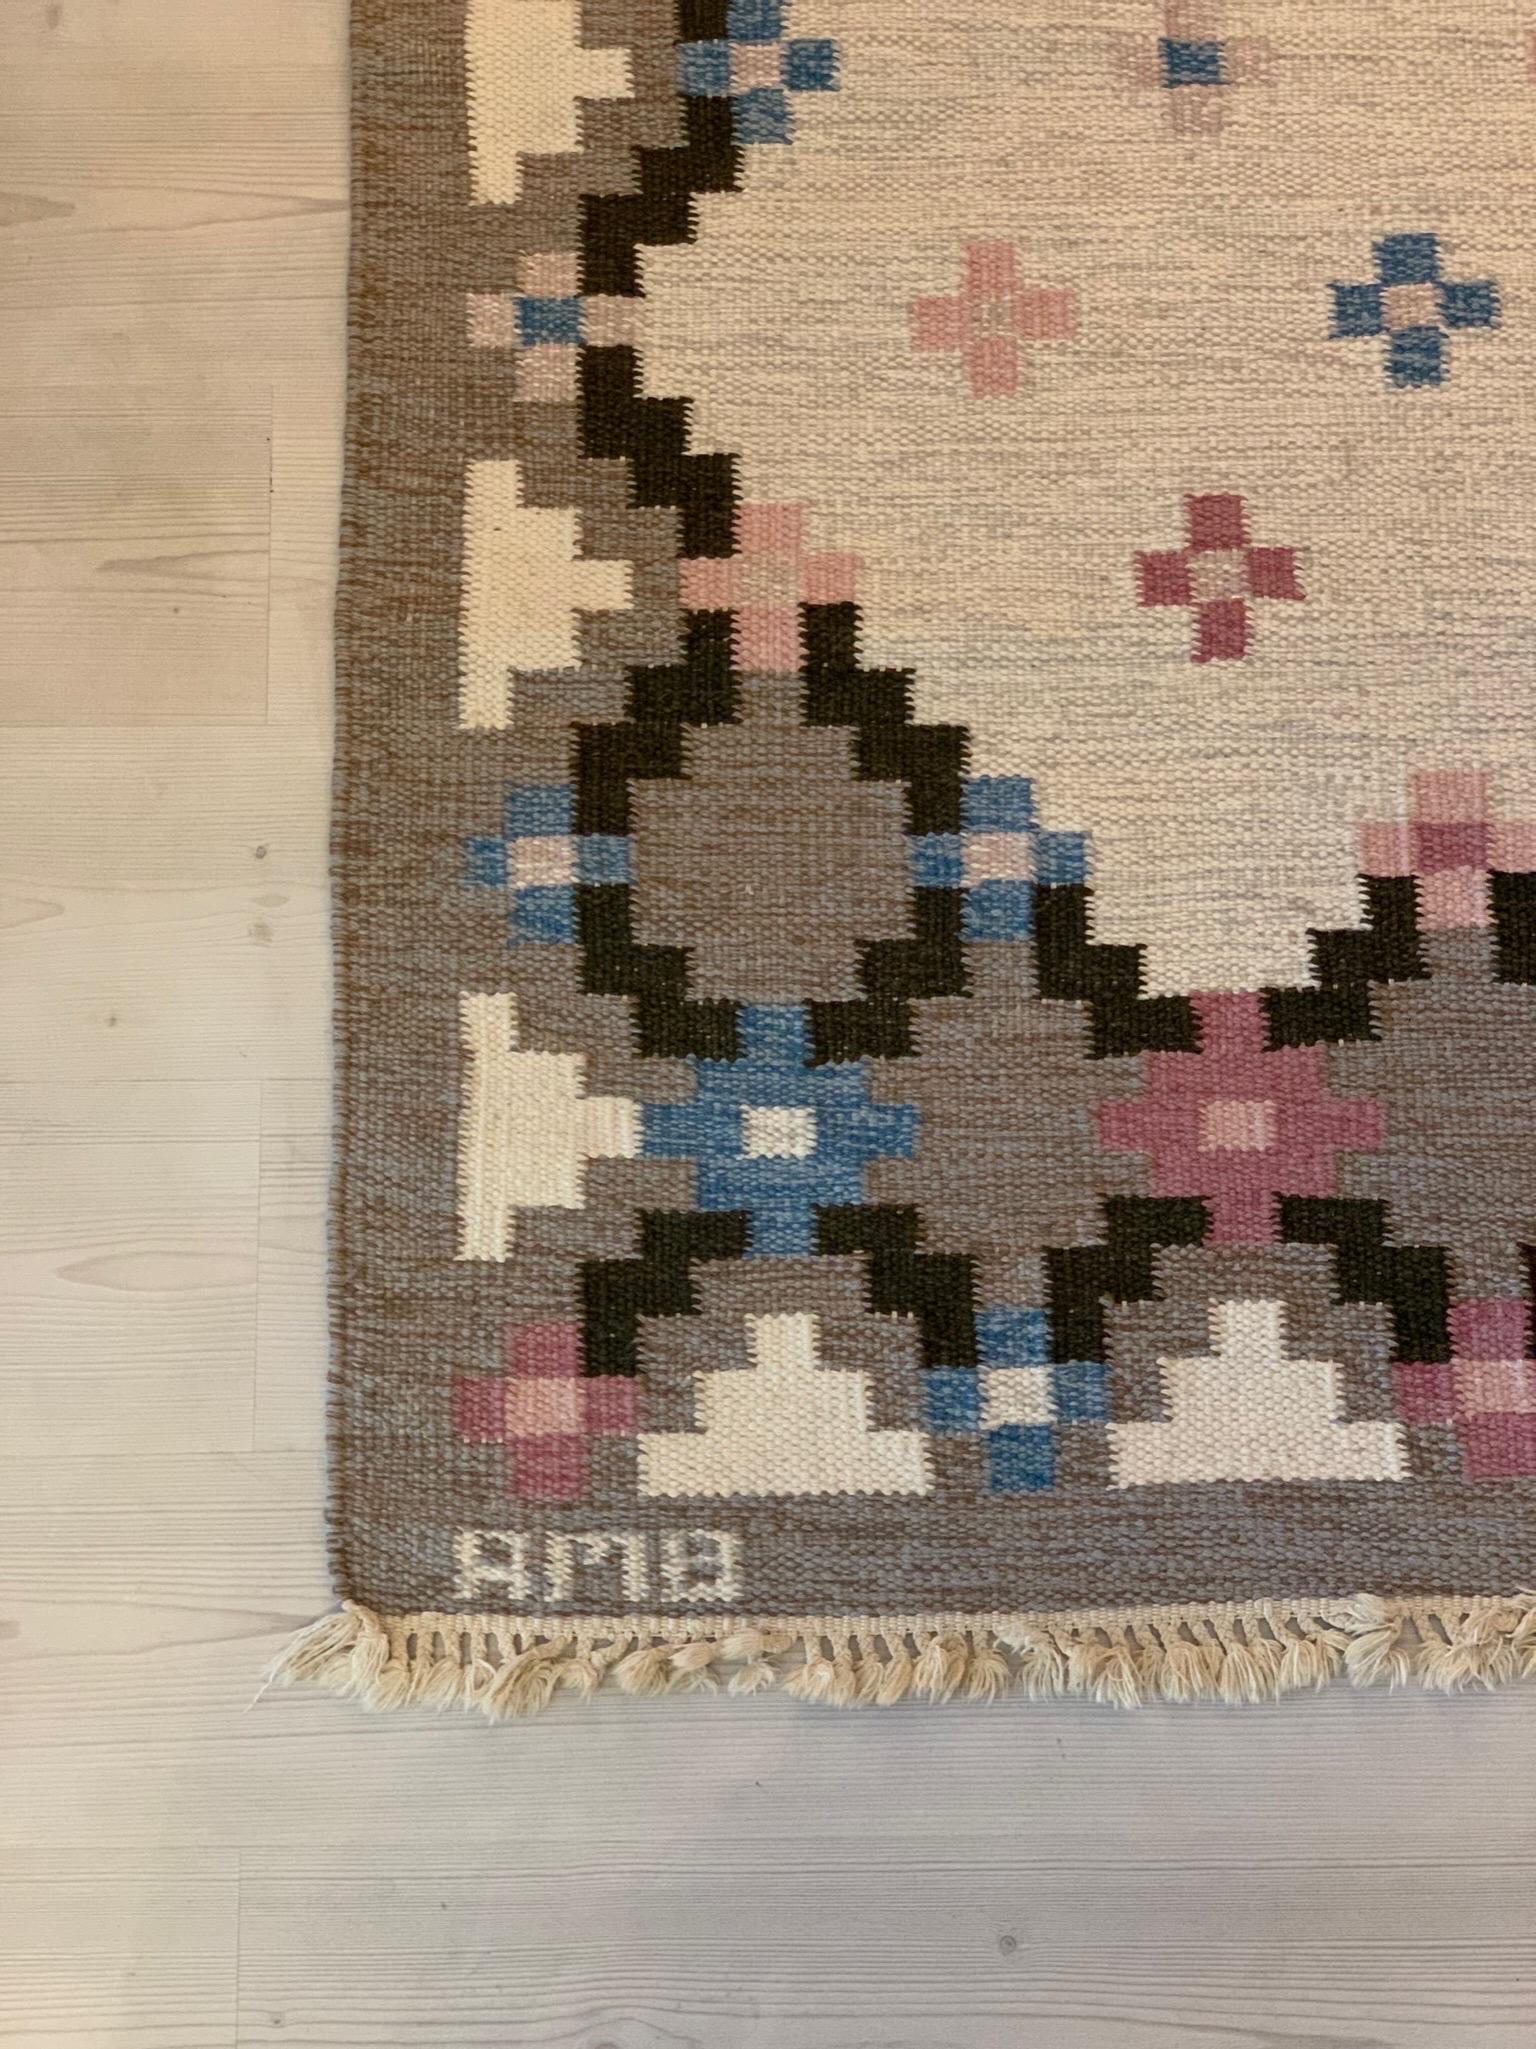 Hand-Woven Swedish Mid-Century Kilim by Anne-Marie Boberg 1950s For Sale